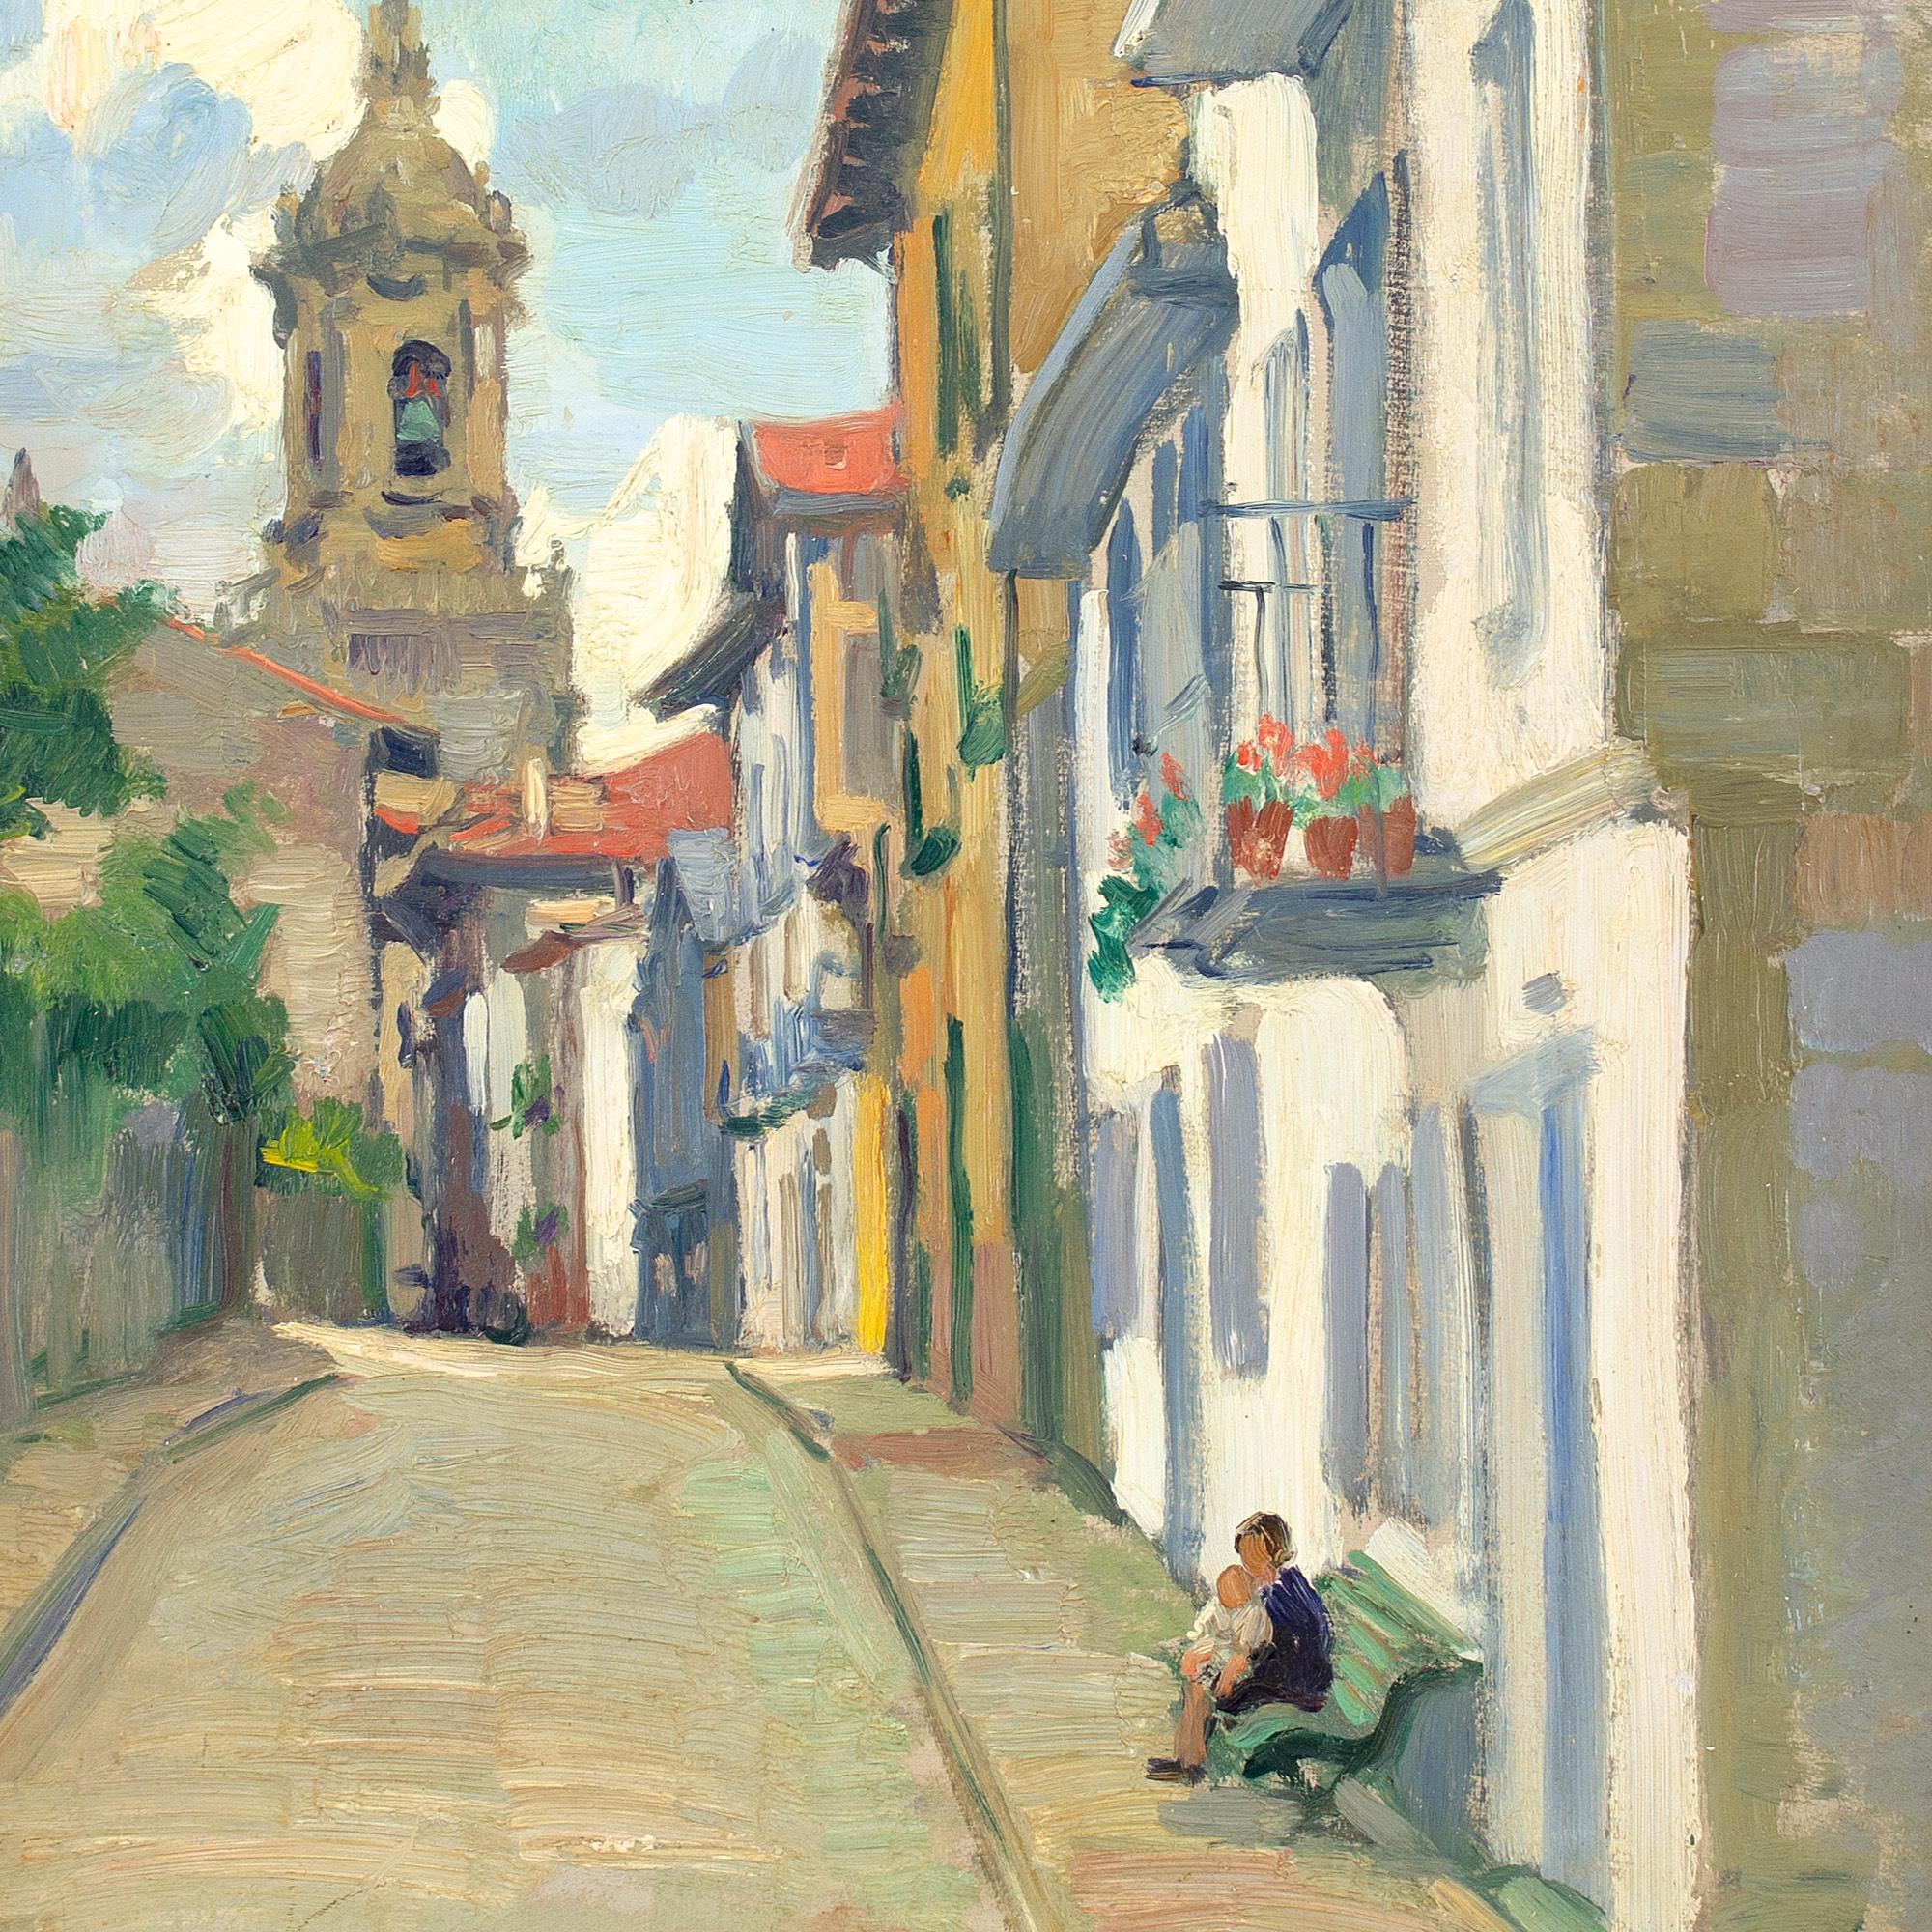 This early 20th-century oil painting by Belgian artist Philippe Swyncop (1878-1949) depicts a colourful street in Fontarrabie, Spain.

Fontarrabie, or Hondarribia as it’s known in Spanish, is a charming historic town situated close to the French